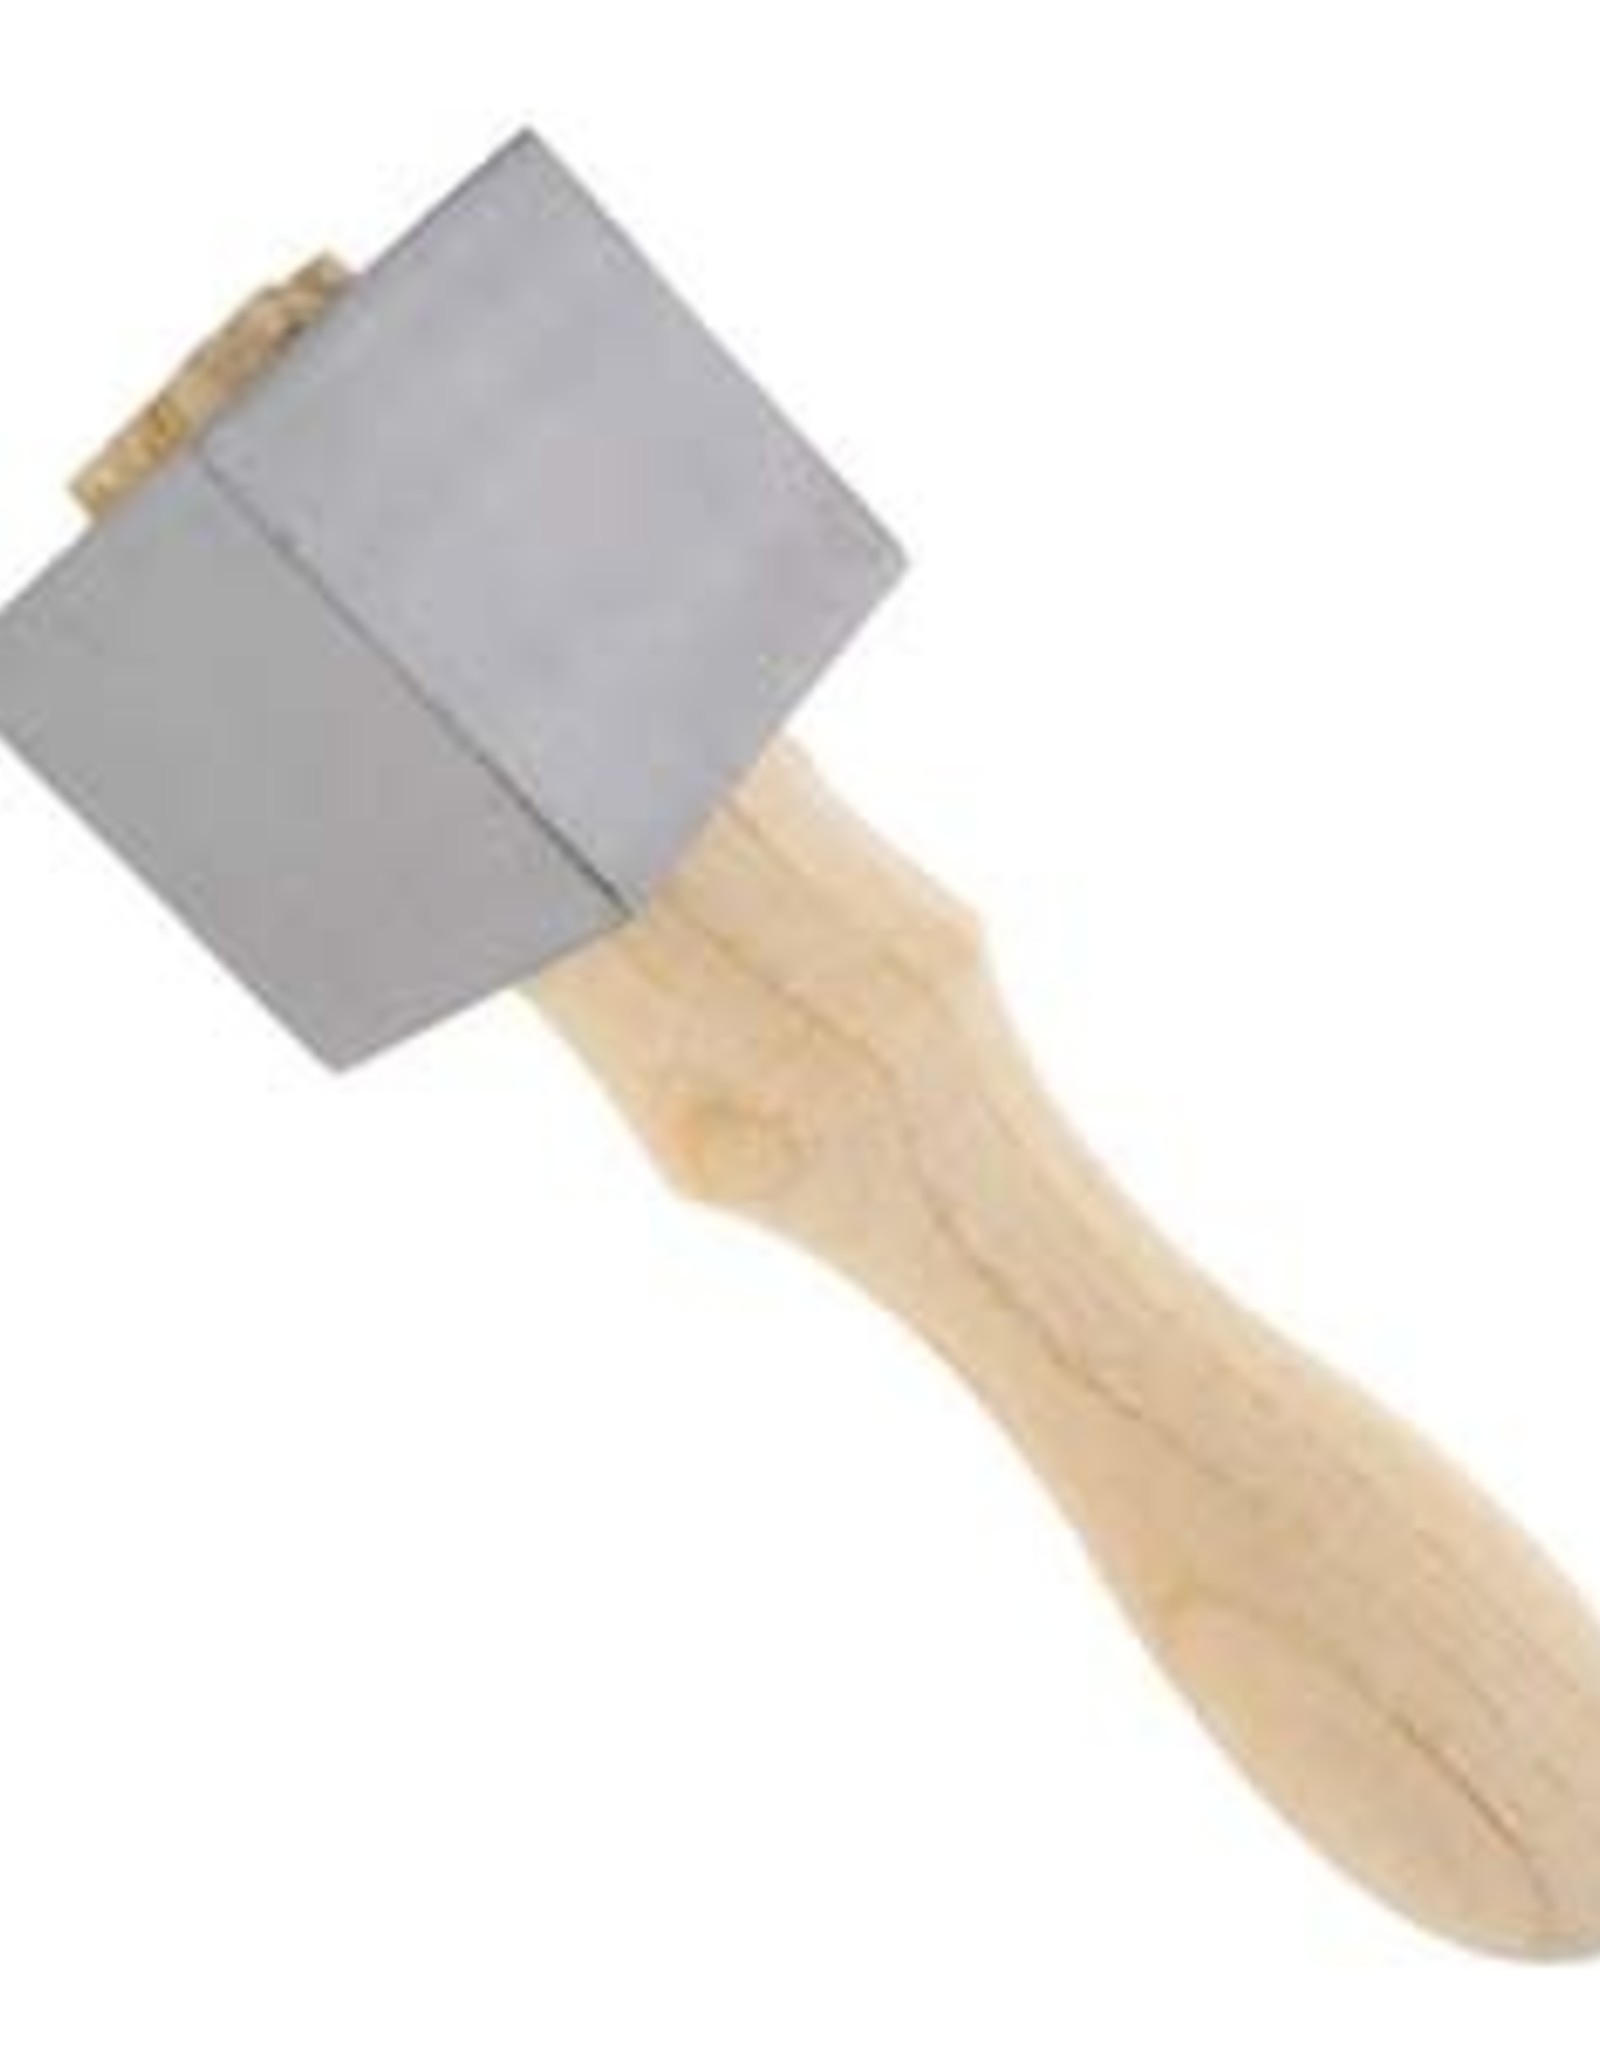 Beadsmith Square Head Stamping Hammer 1.75lb